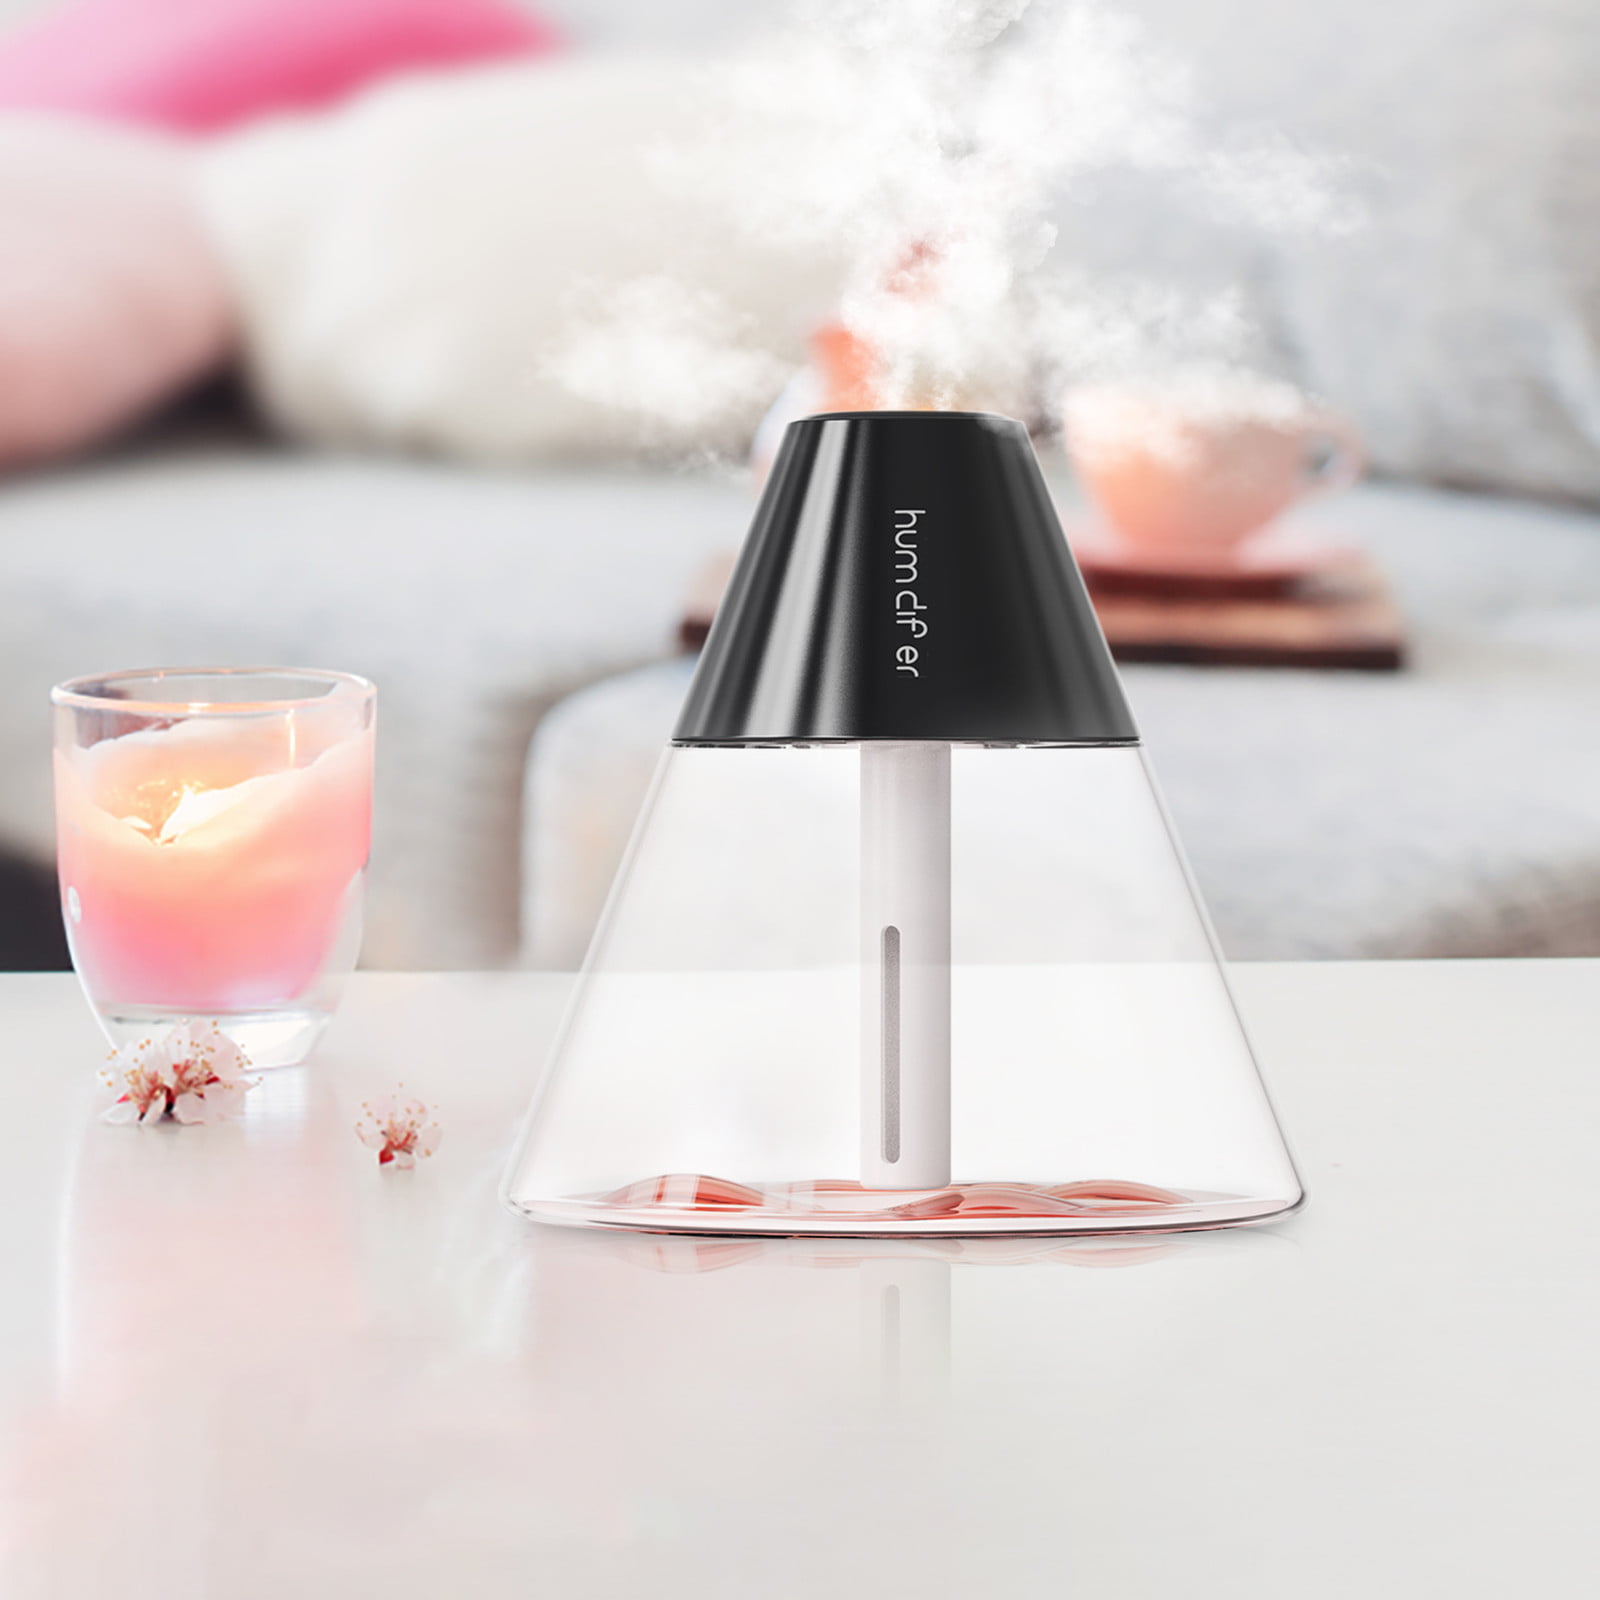 Herrnalise Volcano Mini Air Diffuser Humidifier,Mini Oil Essential Diffuser  USB Portable Table Cool Mist Humidifier with Waterless Auto-Off Protection  for Home,Office 